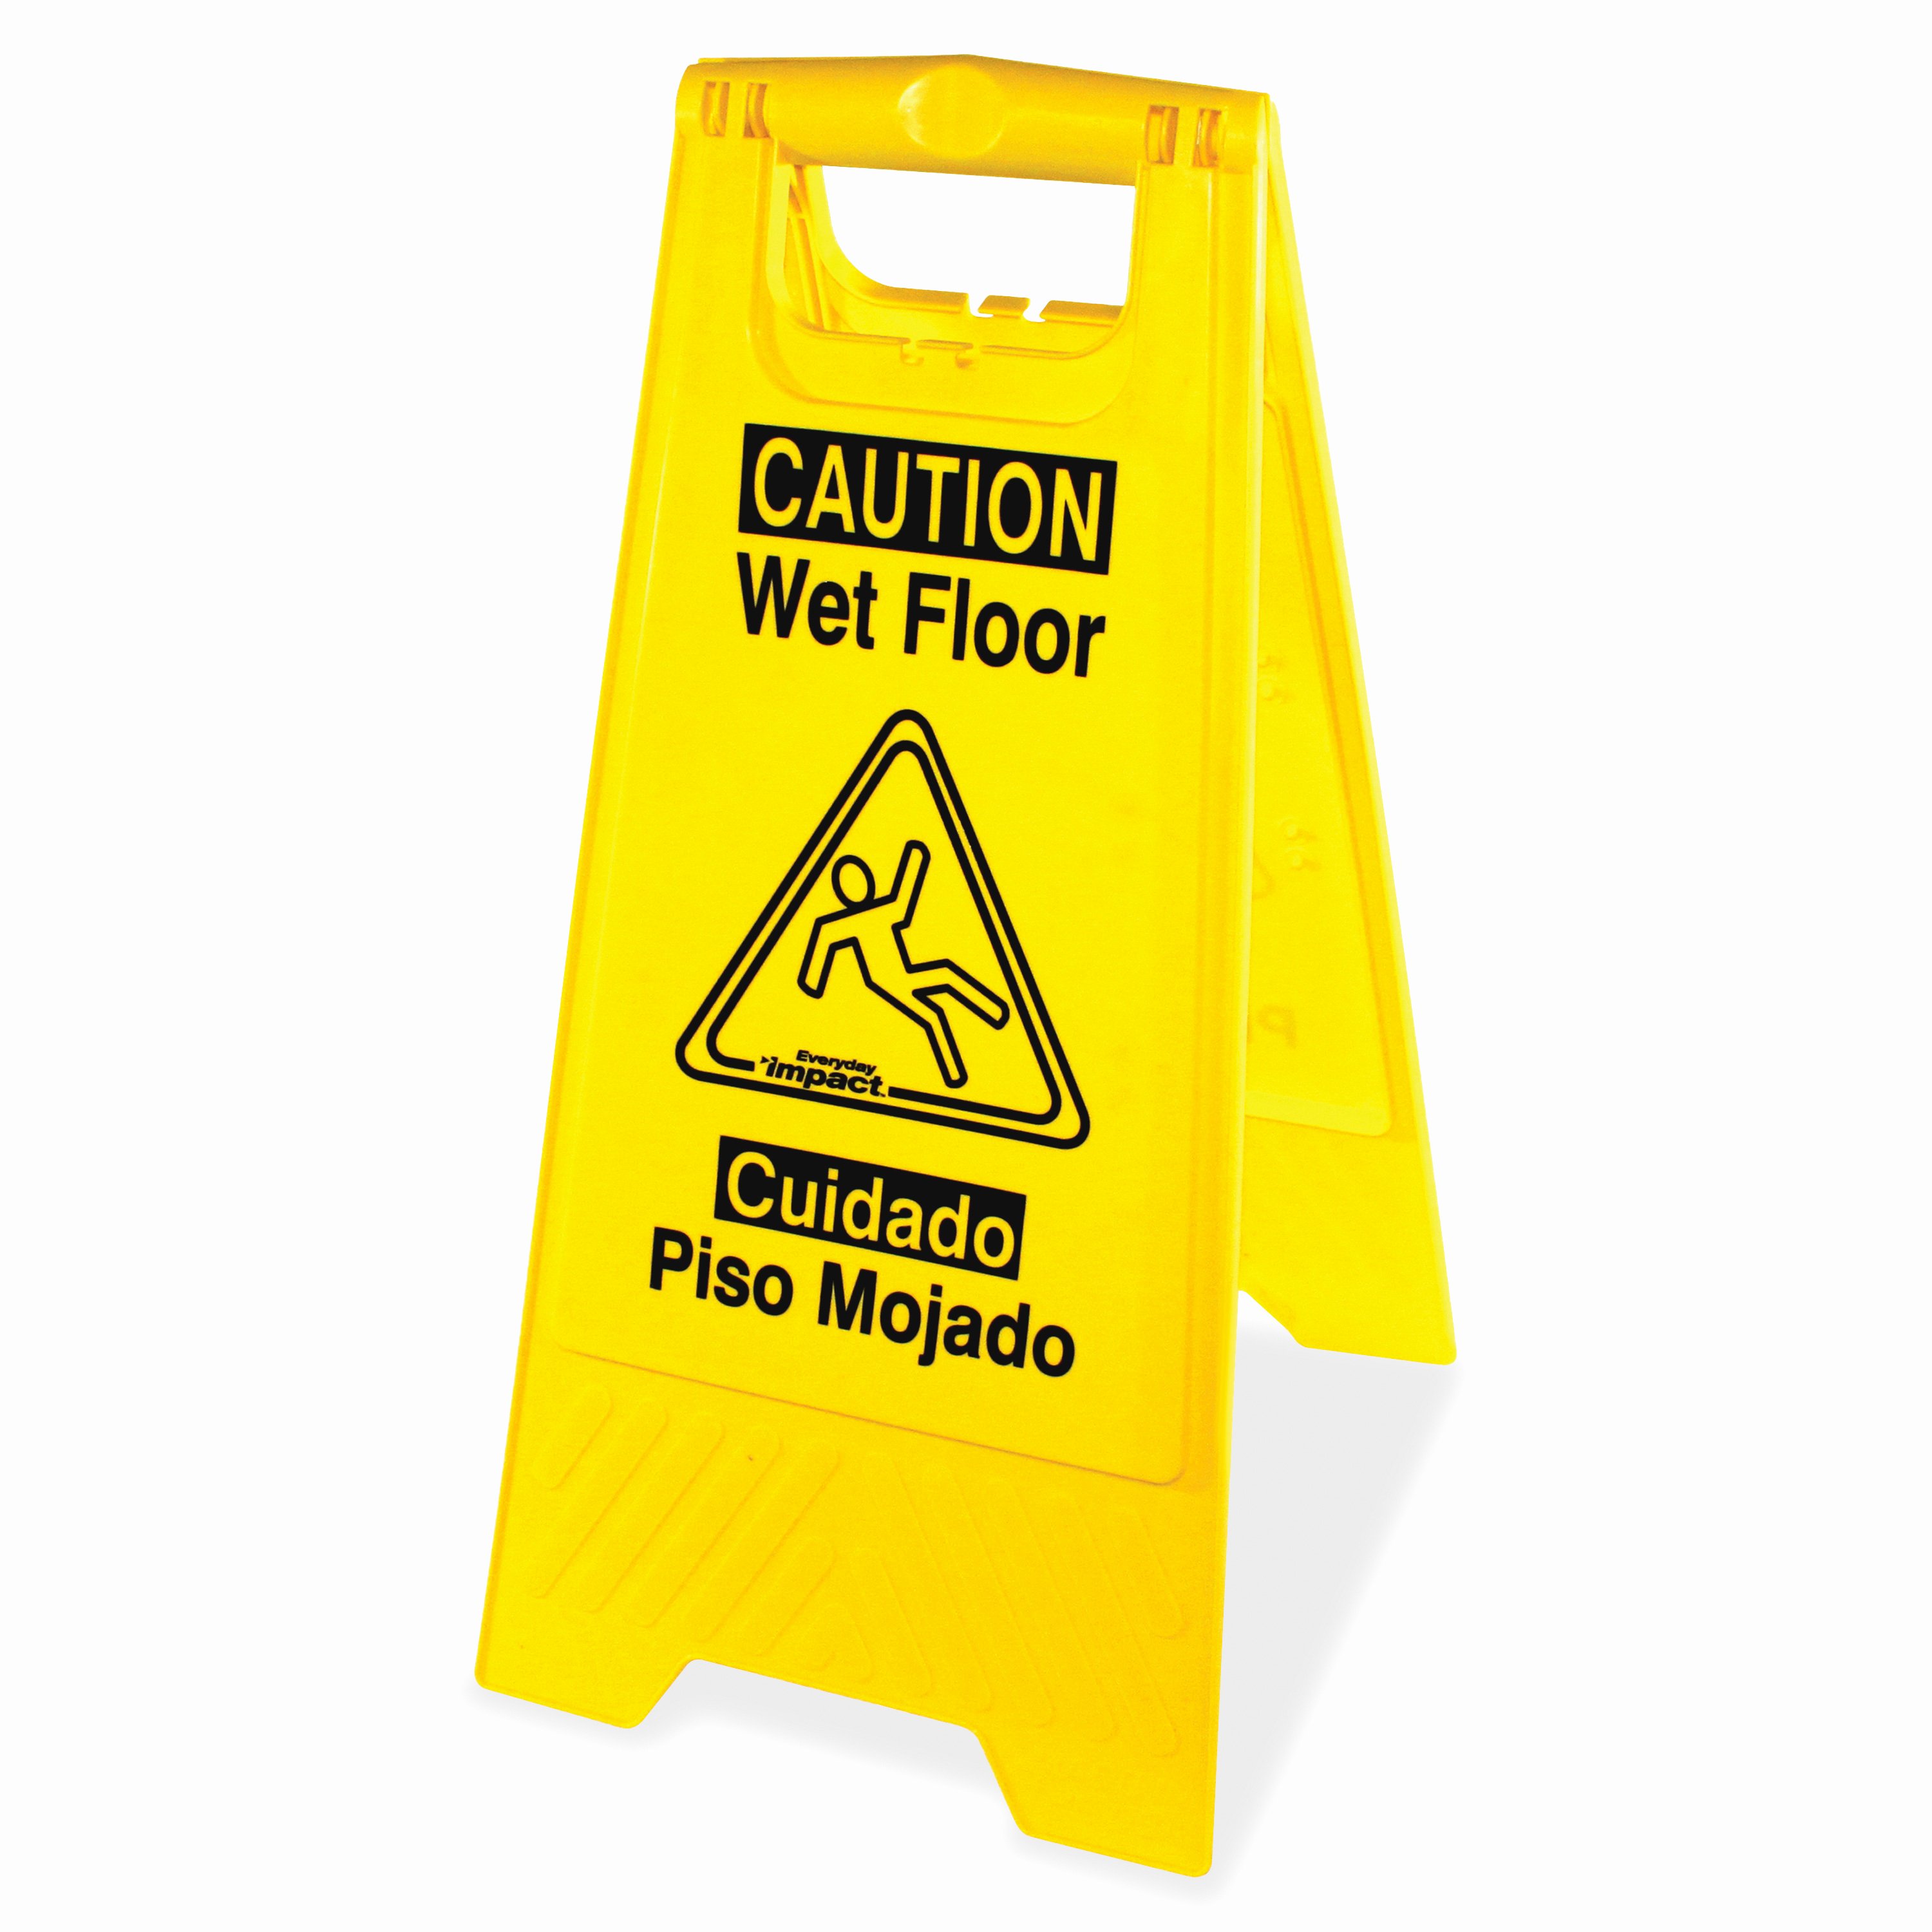 Wet Floor Signs Printable New Impact Products 9152wct English Spanish Wet Floor Sign 6